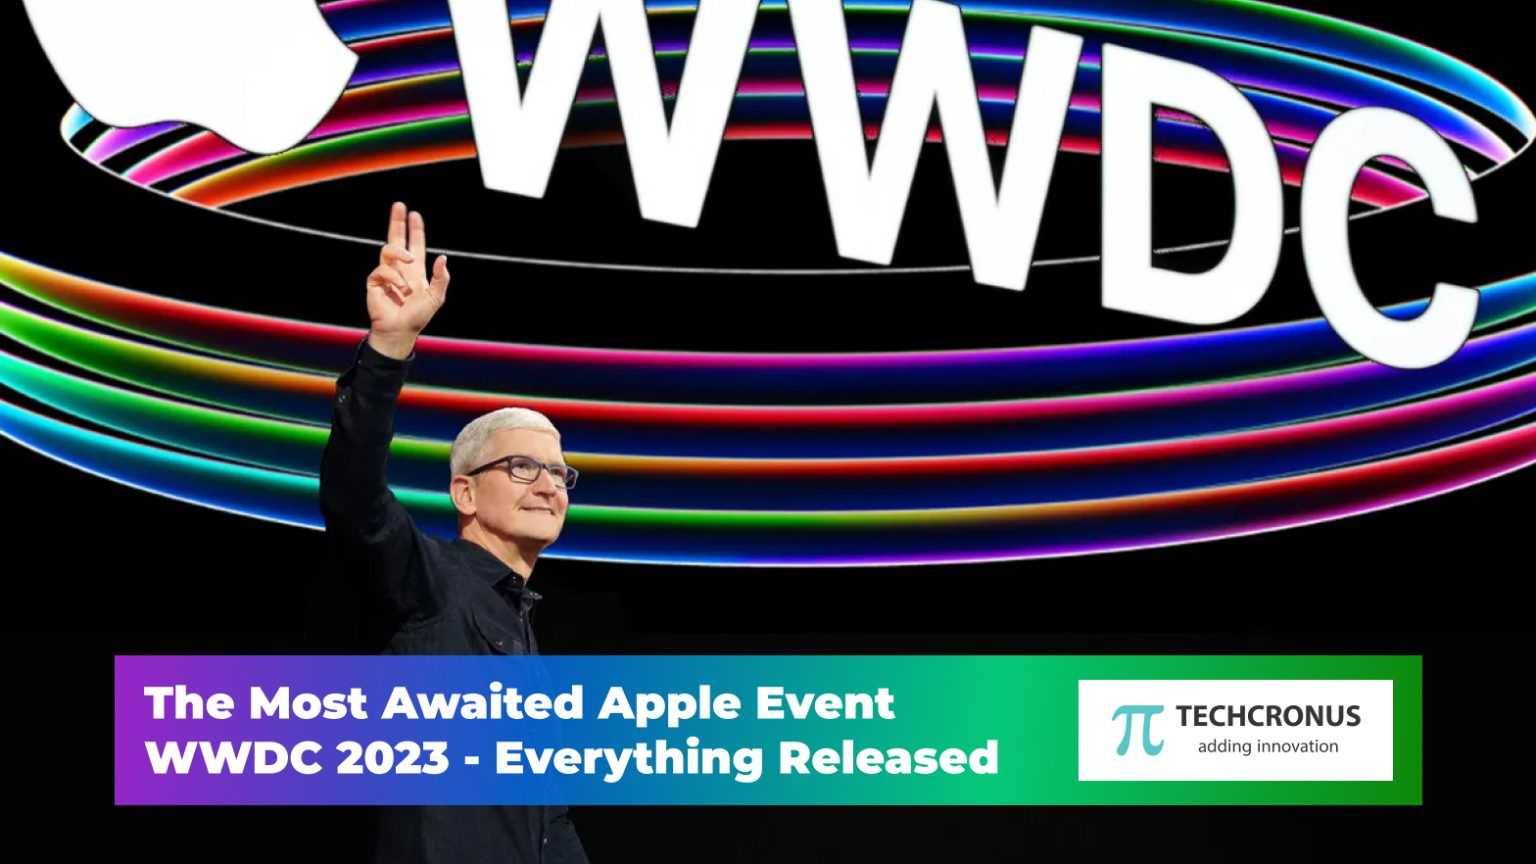 The Most Awaited Apple Event WWDC 2023 - Everything Released | Techcronus